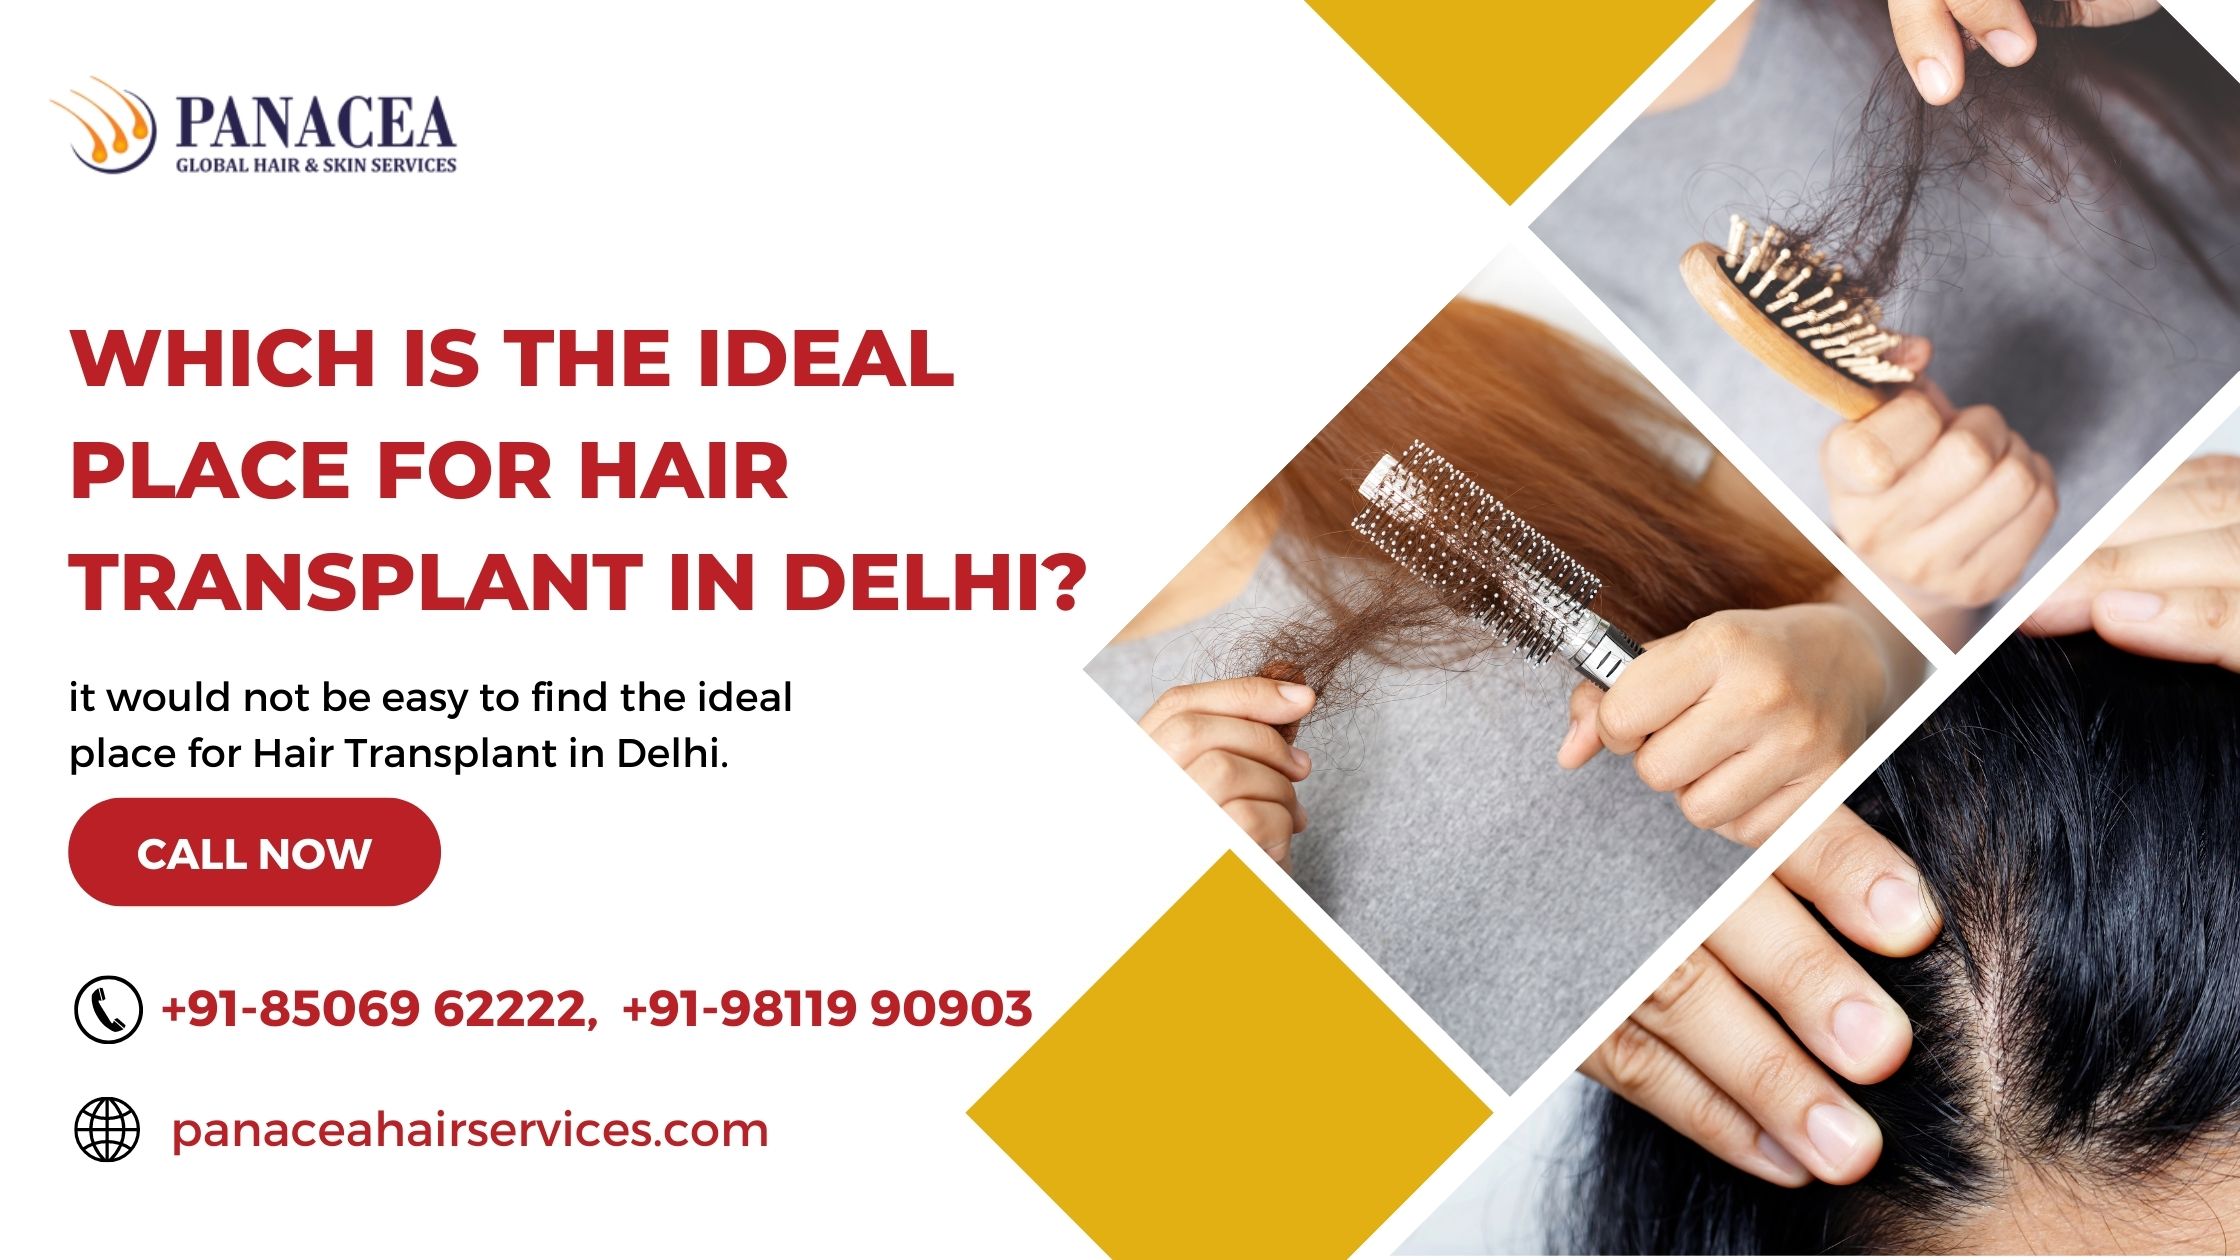 WHICH IS THE IDEAL PLACE FOR HAIR TRANSPLANT IN DELHI